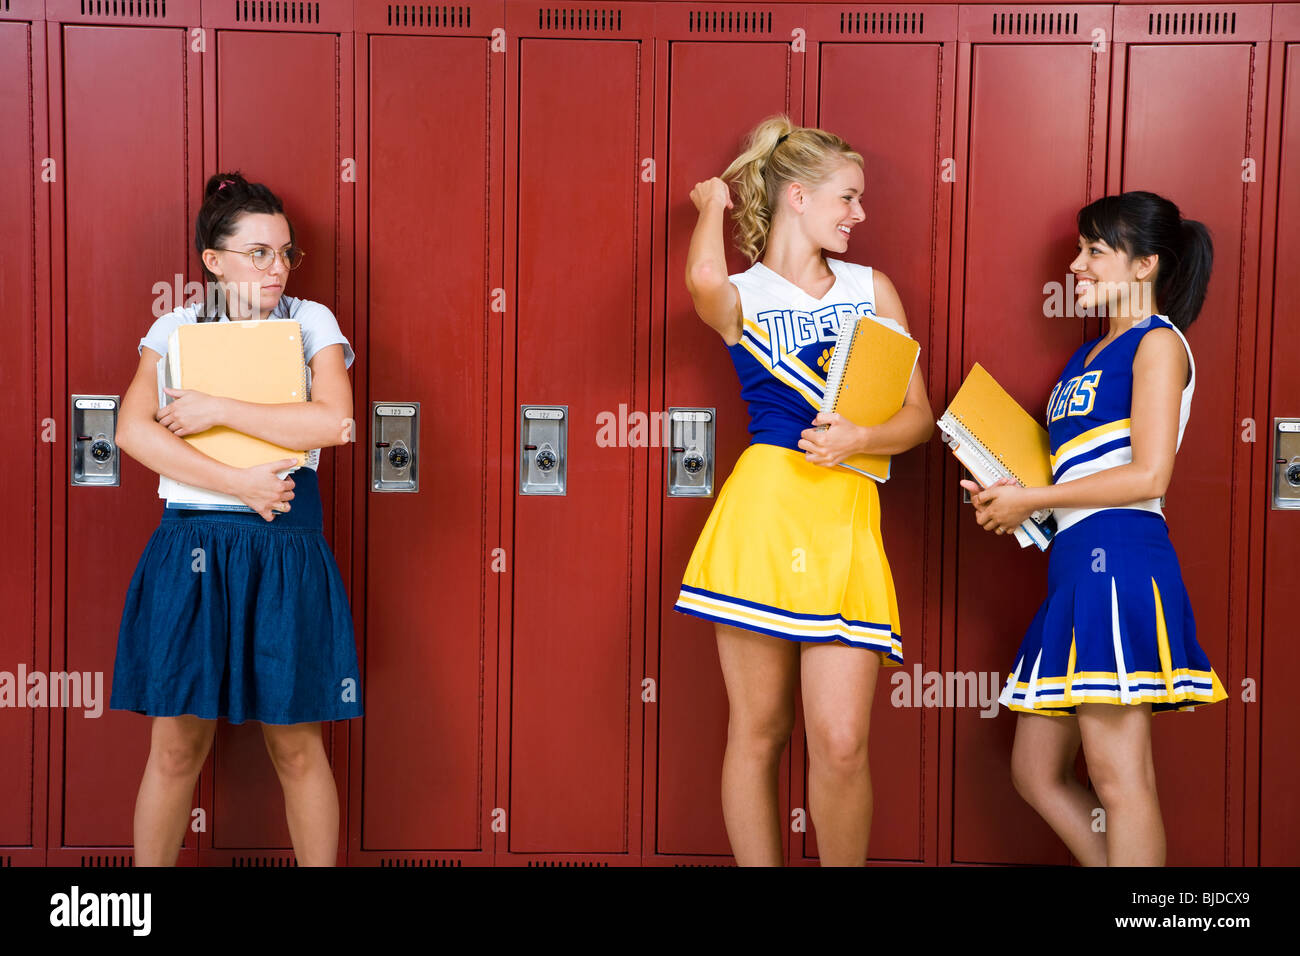 Two High School cheer leaders and a nerd. Stock Photo